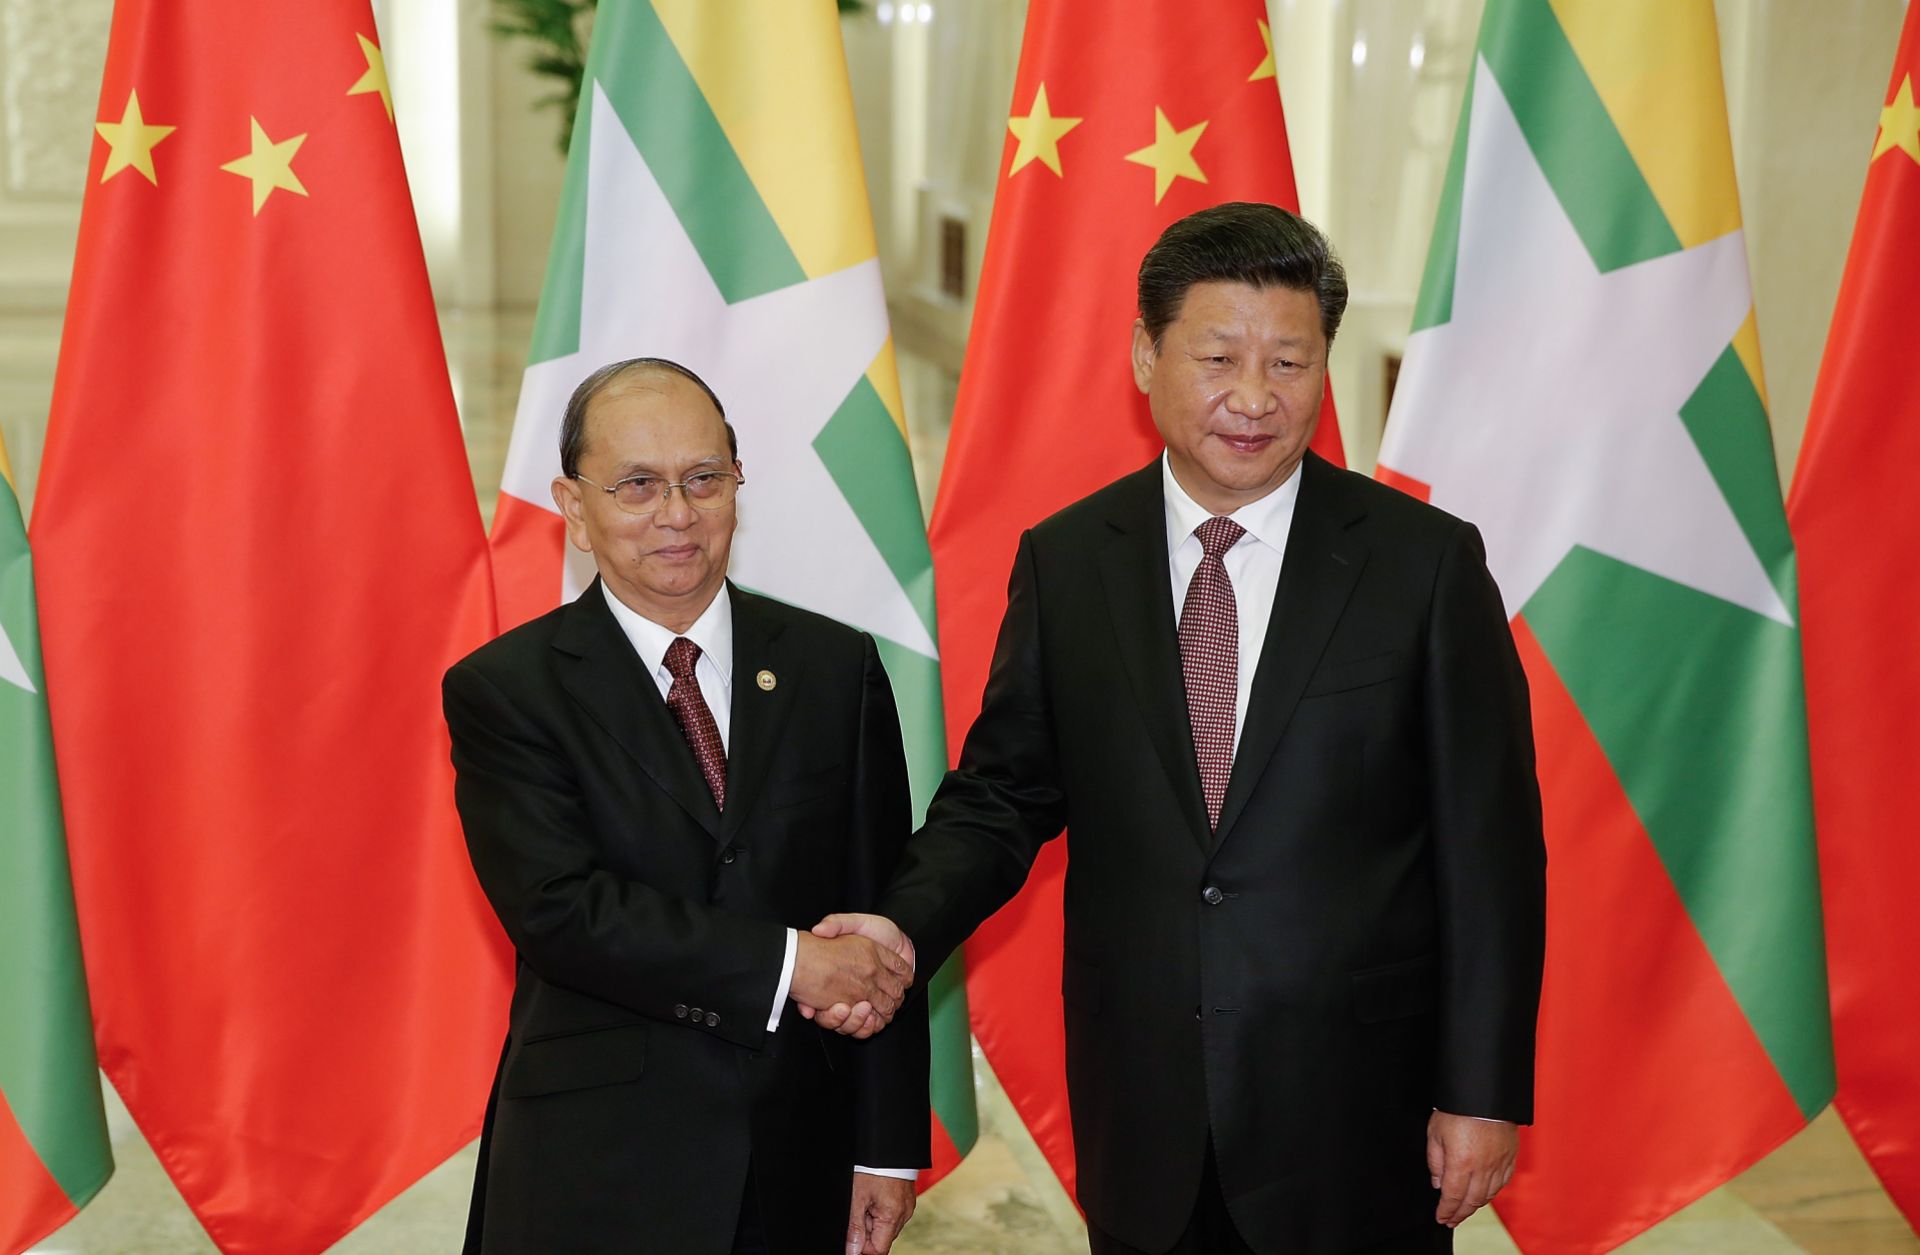 Chinese President Xi Jinping shakes hands with Myanmar's President Thein Sein at The Great Hall Of The People in Beijing, China. 